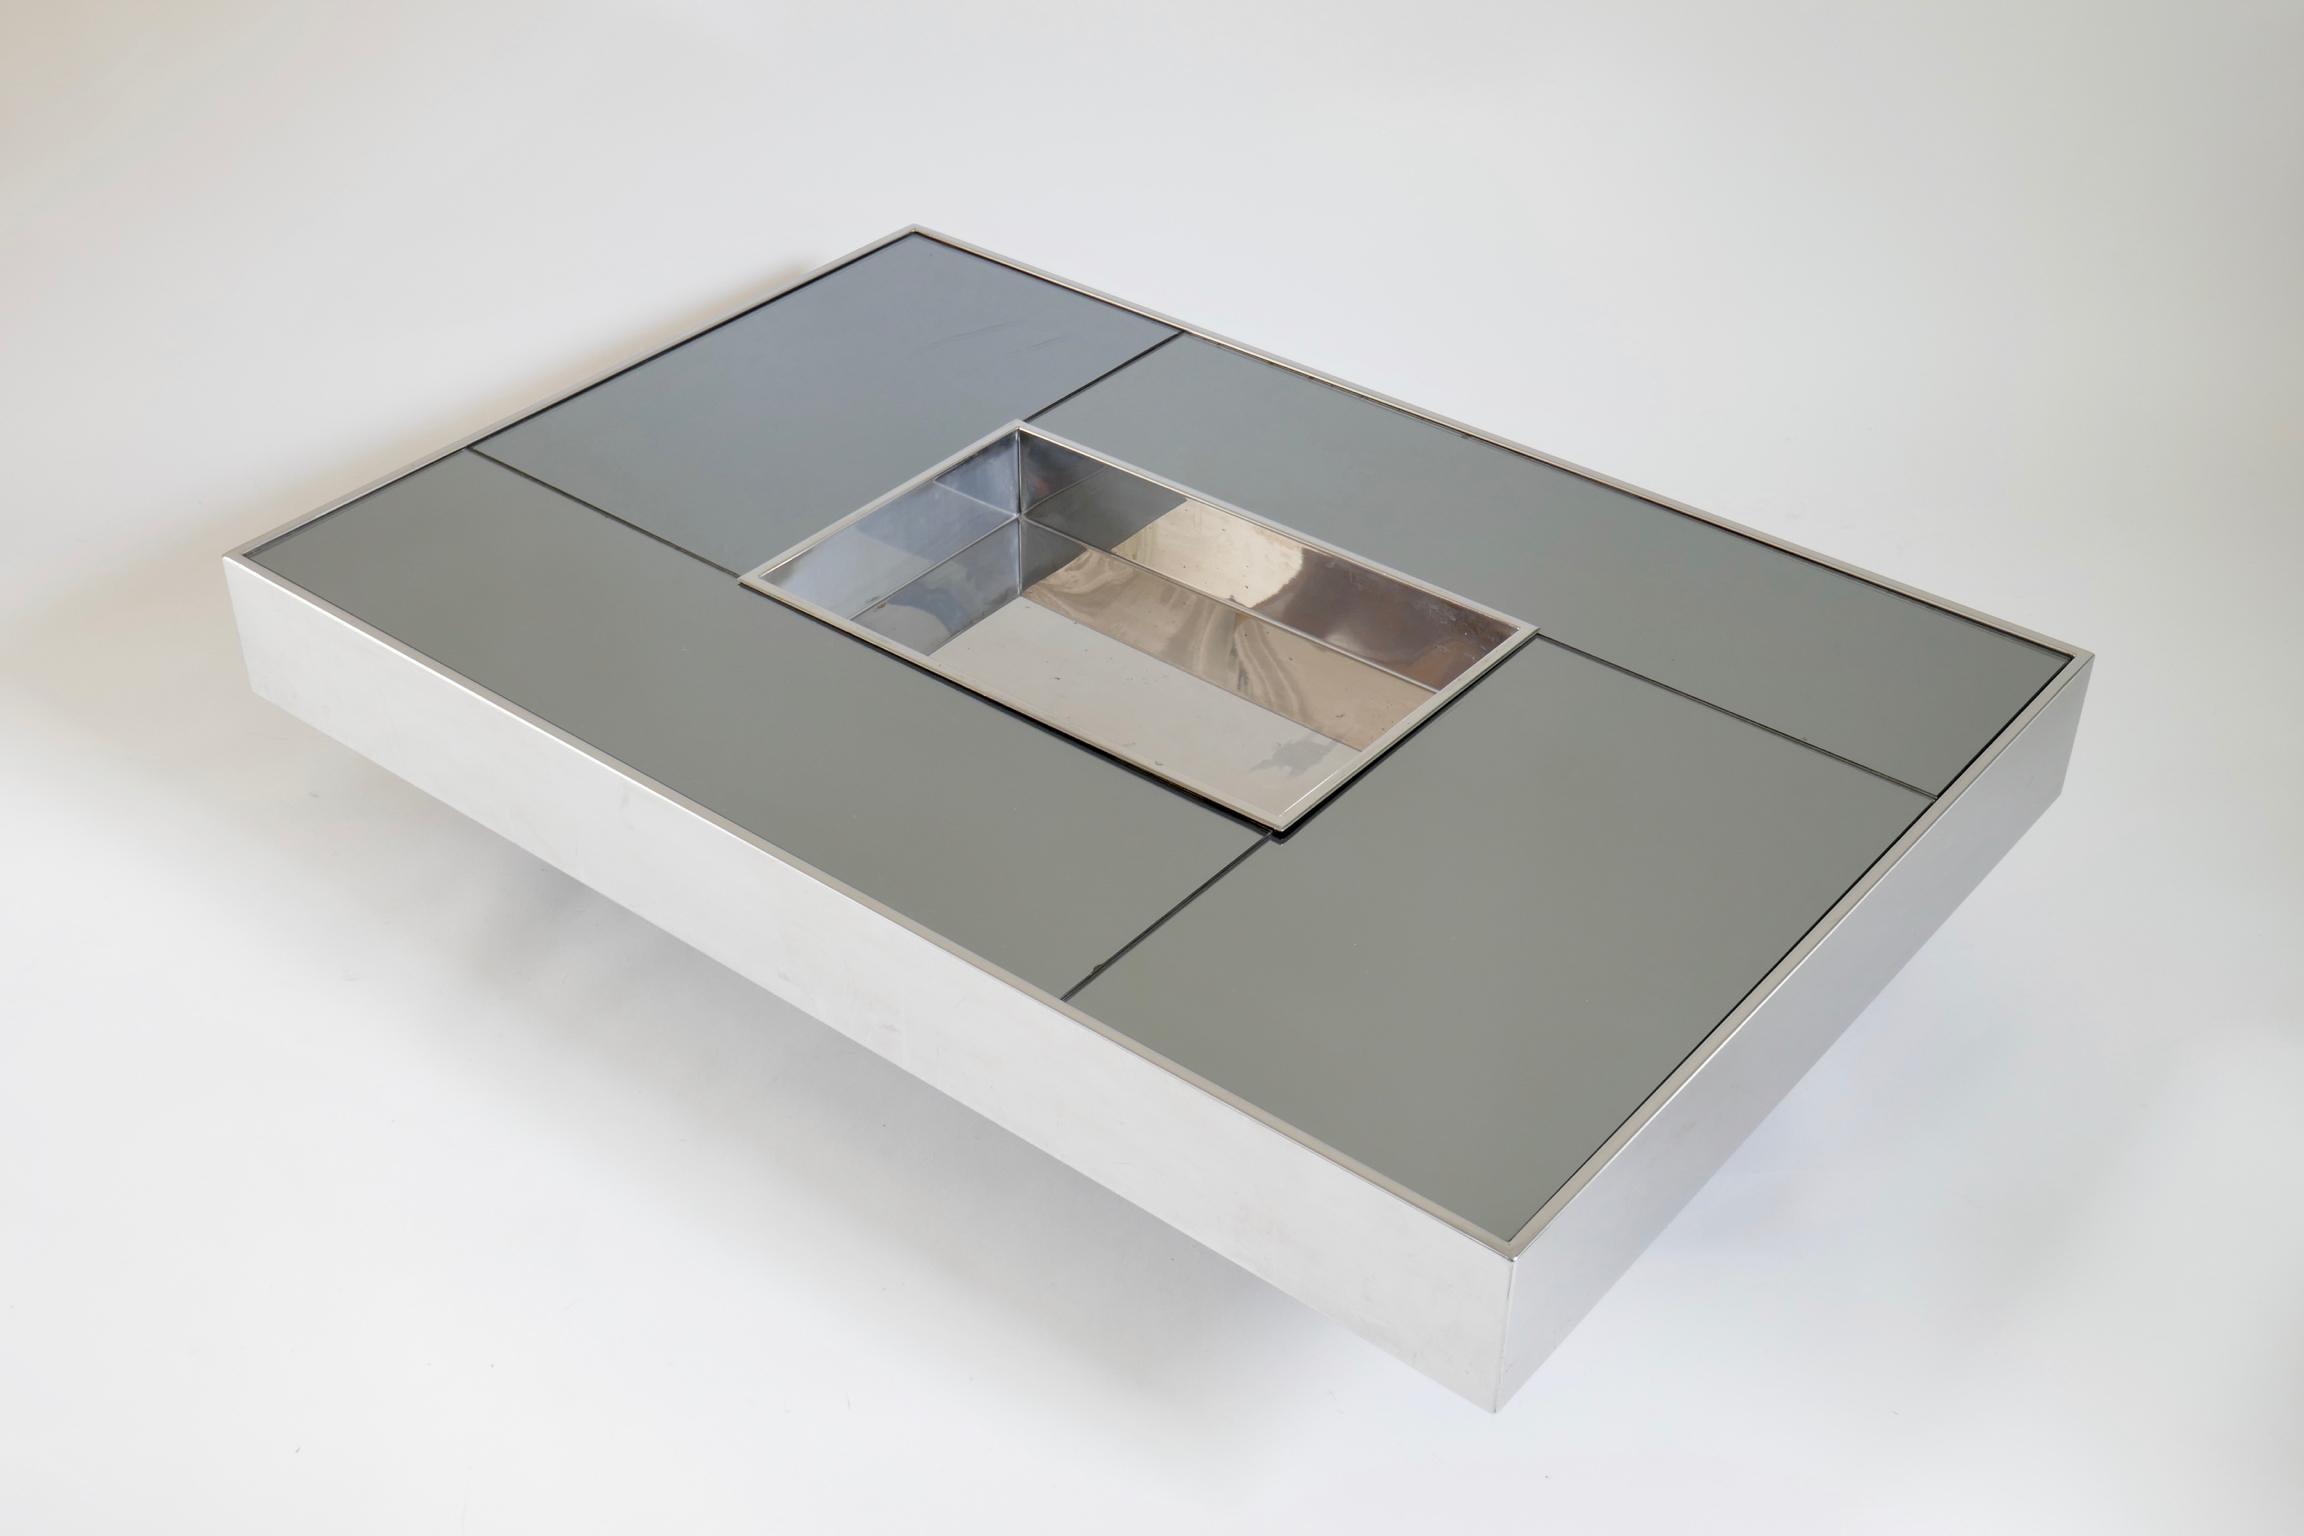 Stainless steel coffee table with smoked mirror top by Giovanni Ausenda, produced in 1970 by Ny Form Italy
Similar to a design by Willy Rizzo.